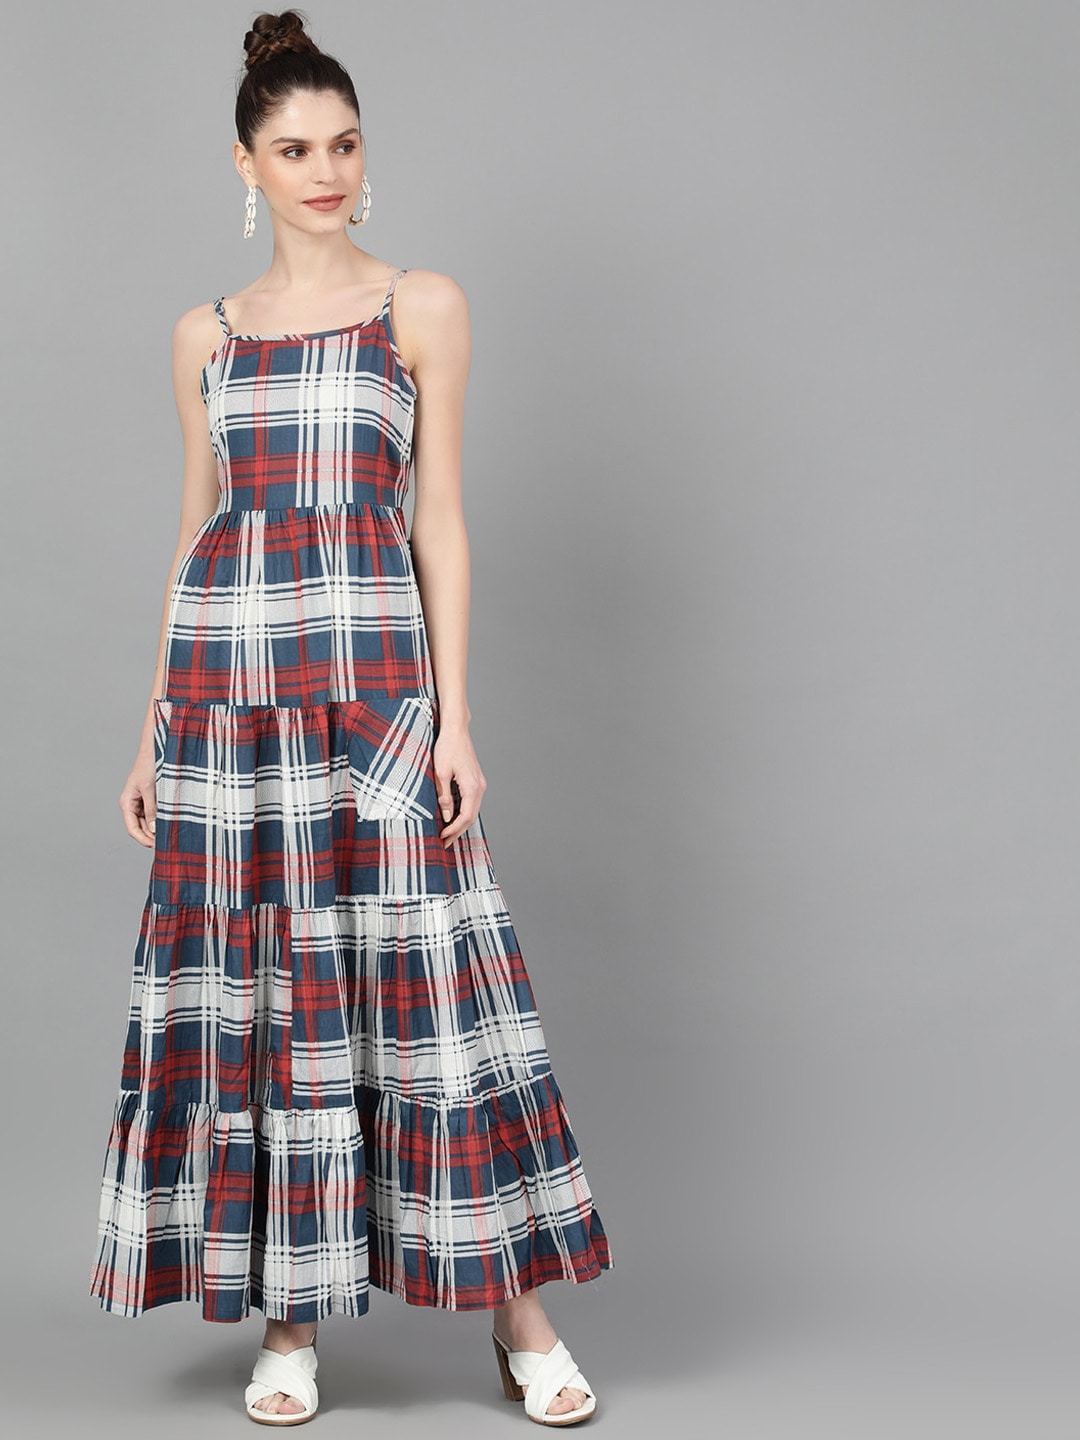 Women's  Blue & Red Checked Maxi Dress - AKS